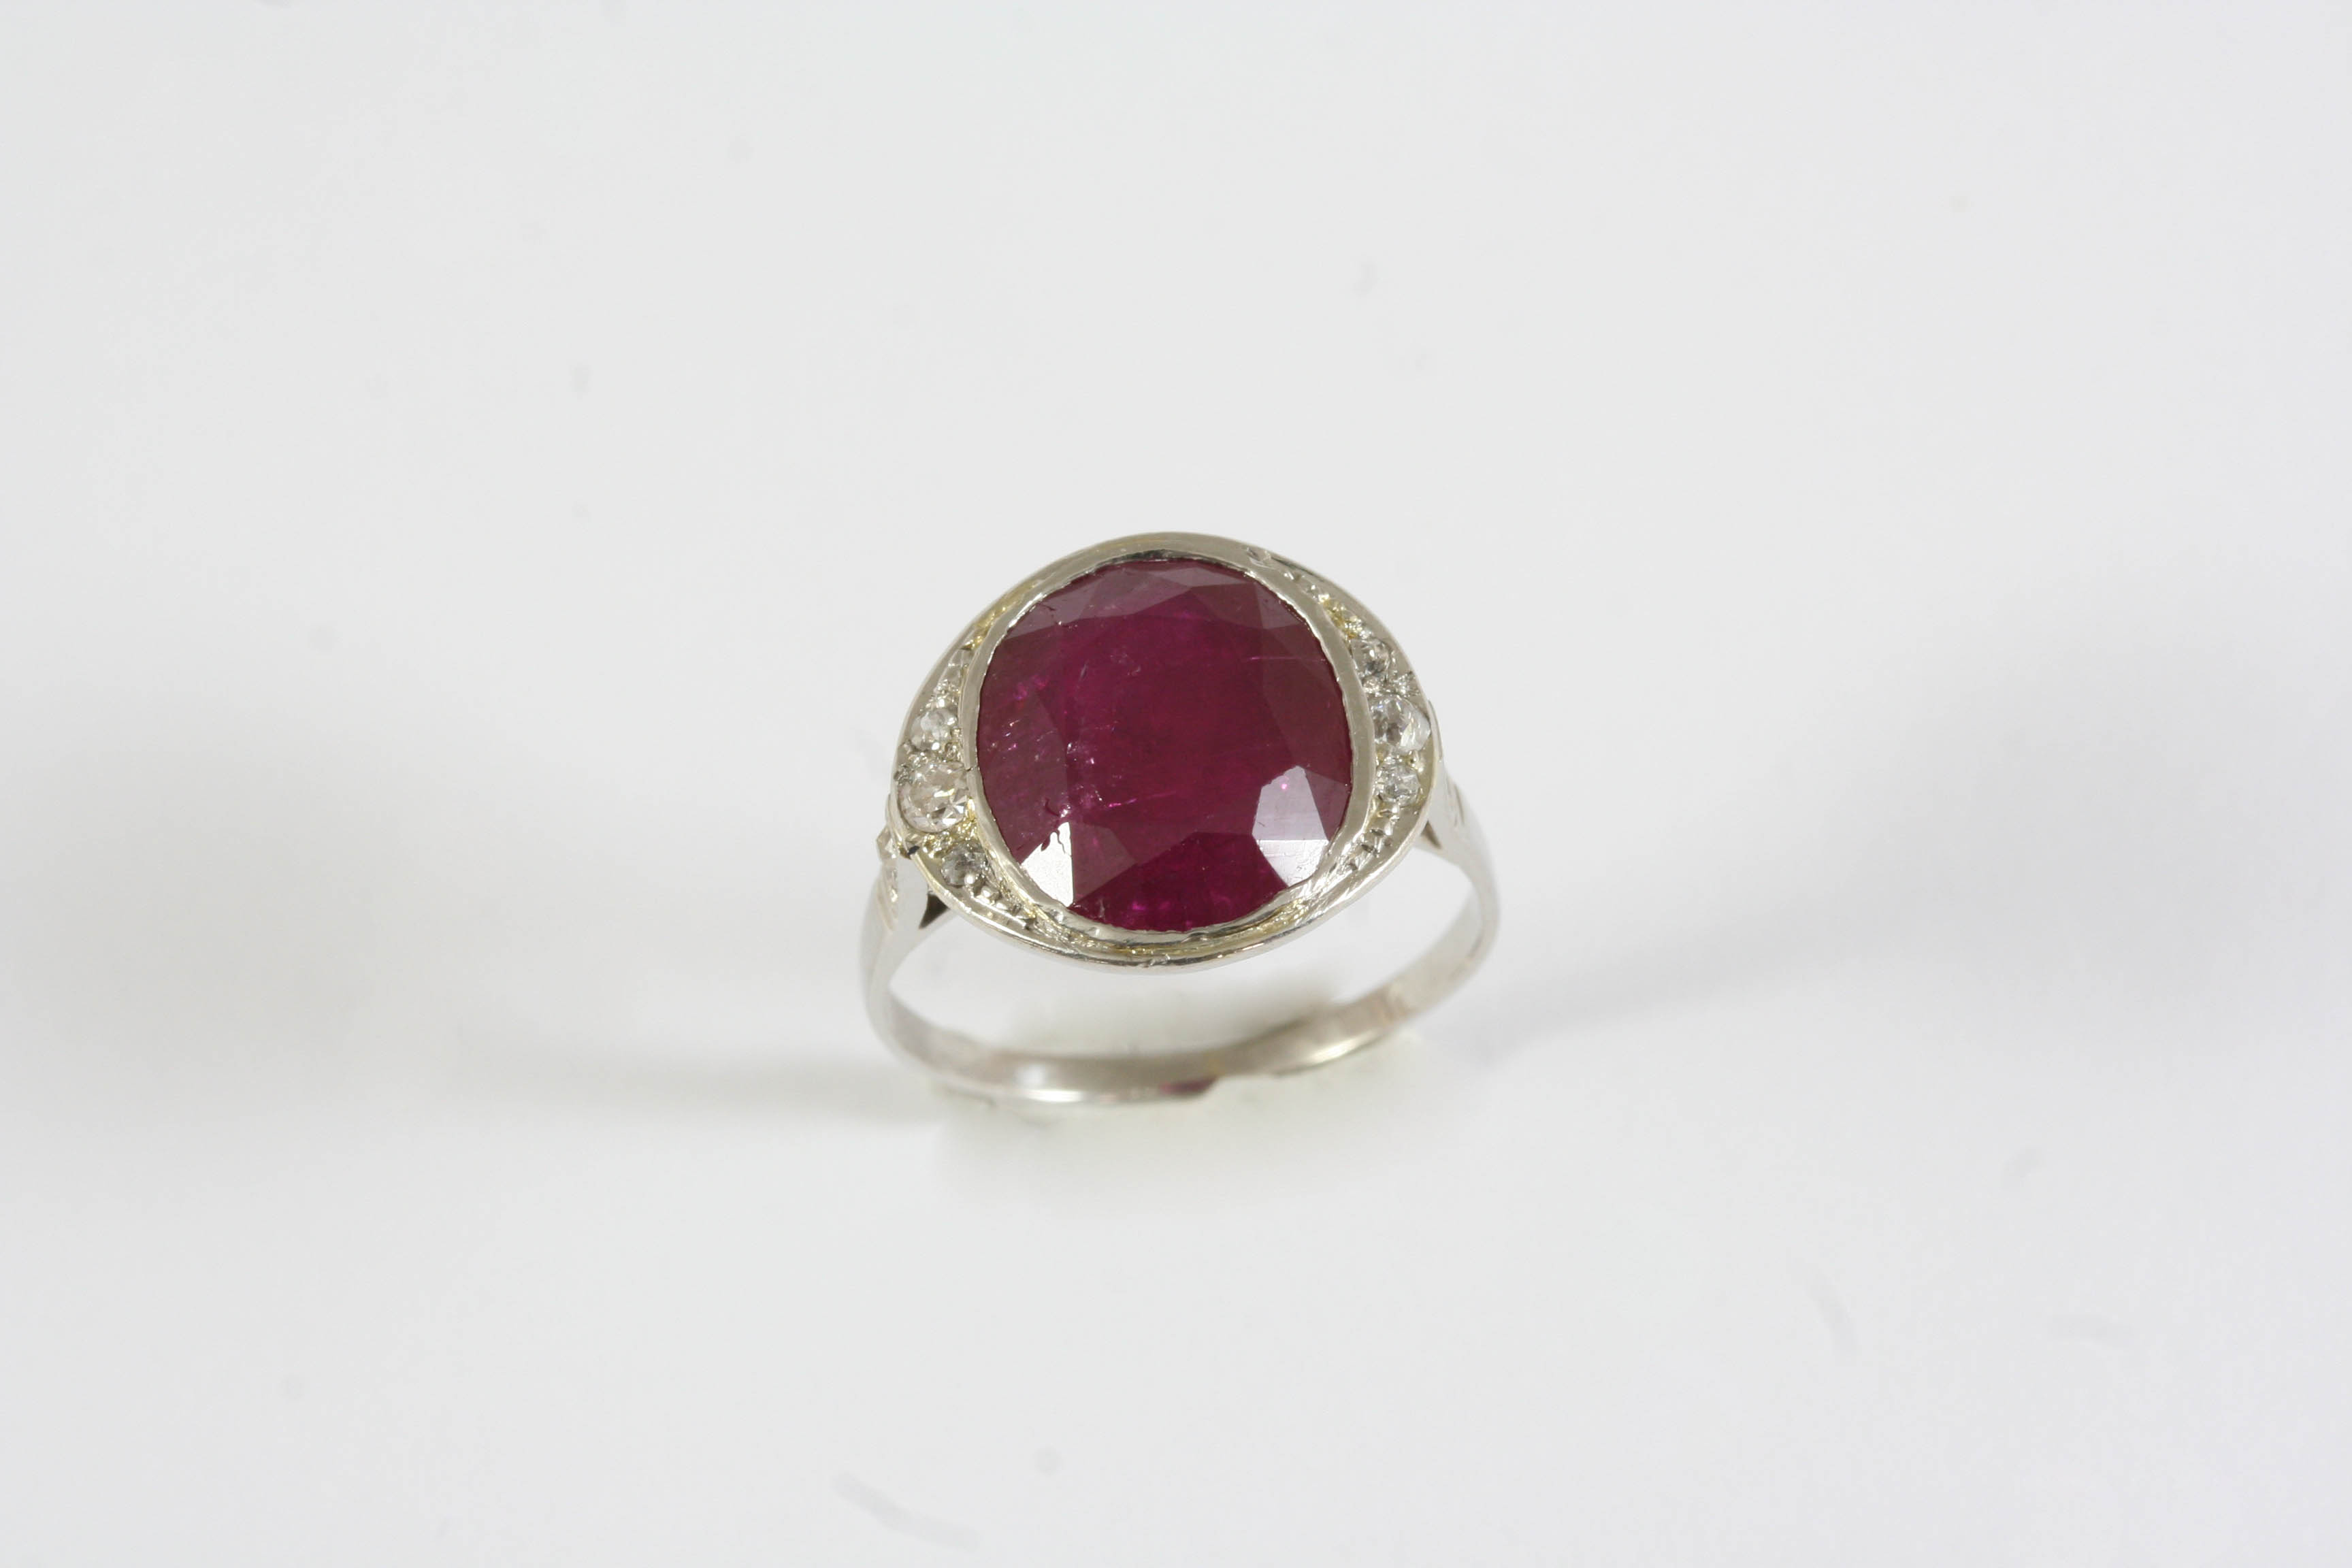 A RUBY AND DIAMOND RING the oval-shaped ruby weighs 6.21 carats and is set with graduated old